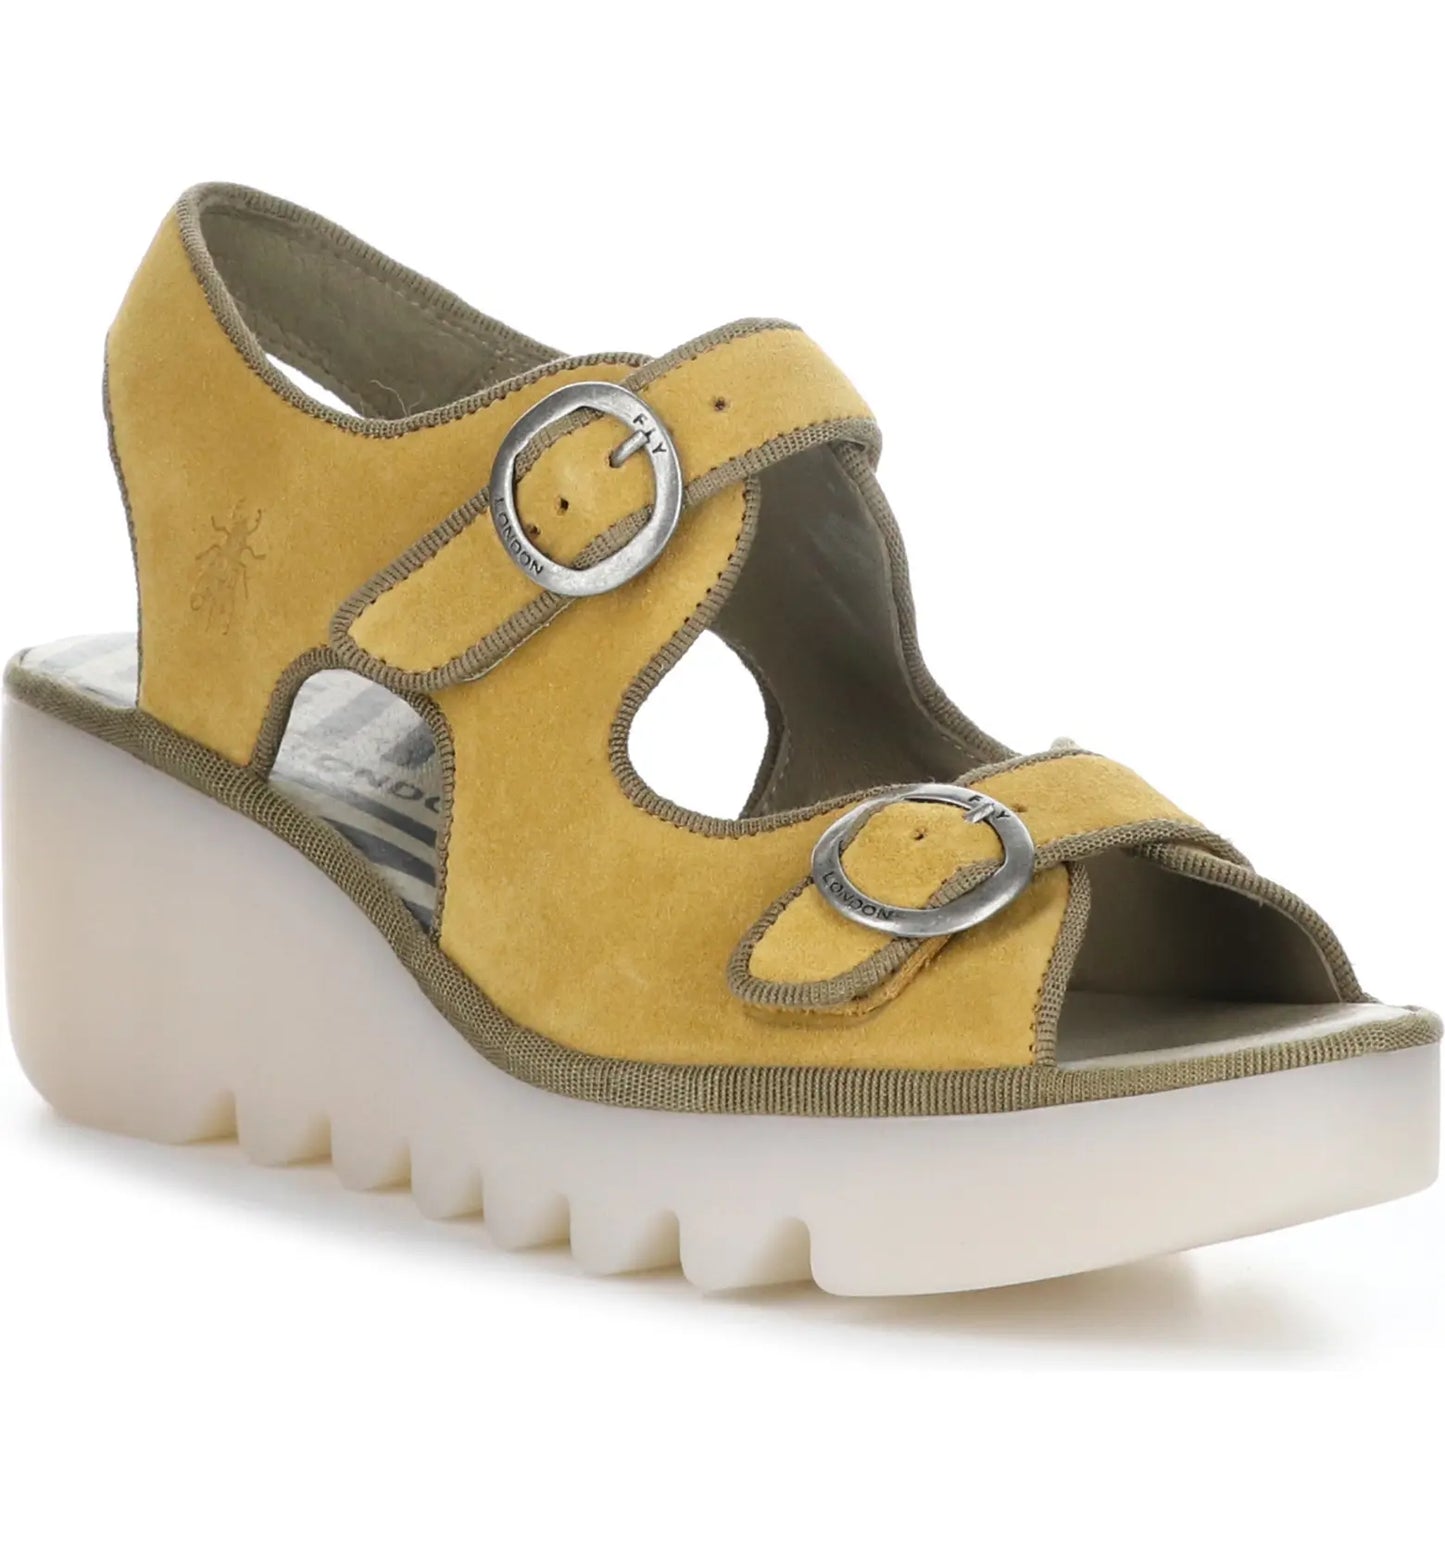 Featuring a hook and loop adjustable upper strap and buckle lower strap, the Fly London golden honey suede leather sandal is set upon a 3 inch shock-attenuating wedge sole crafted in Portugal.